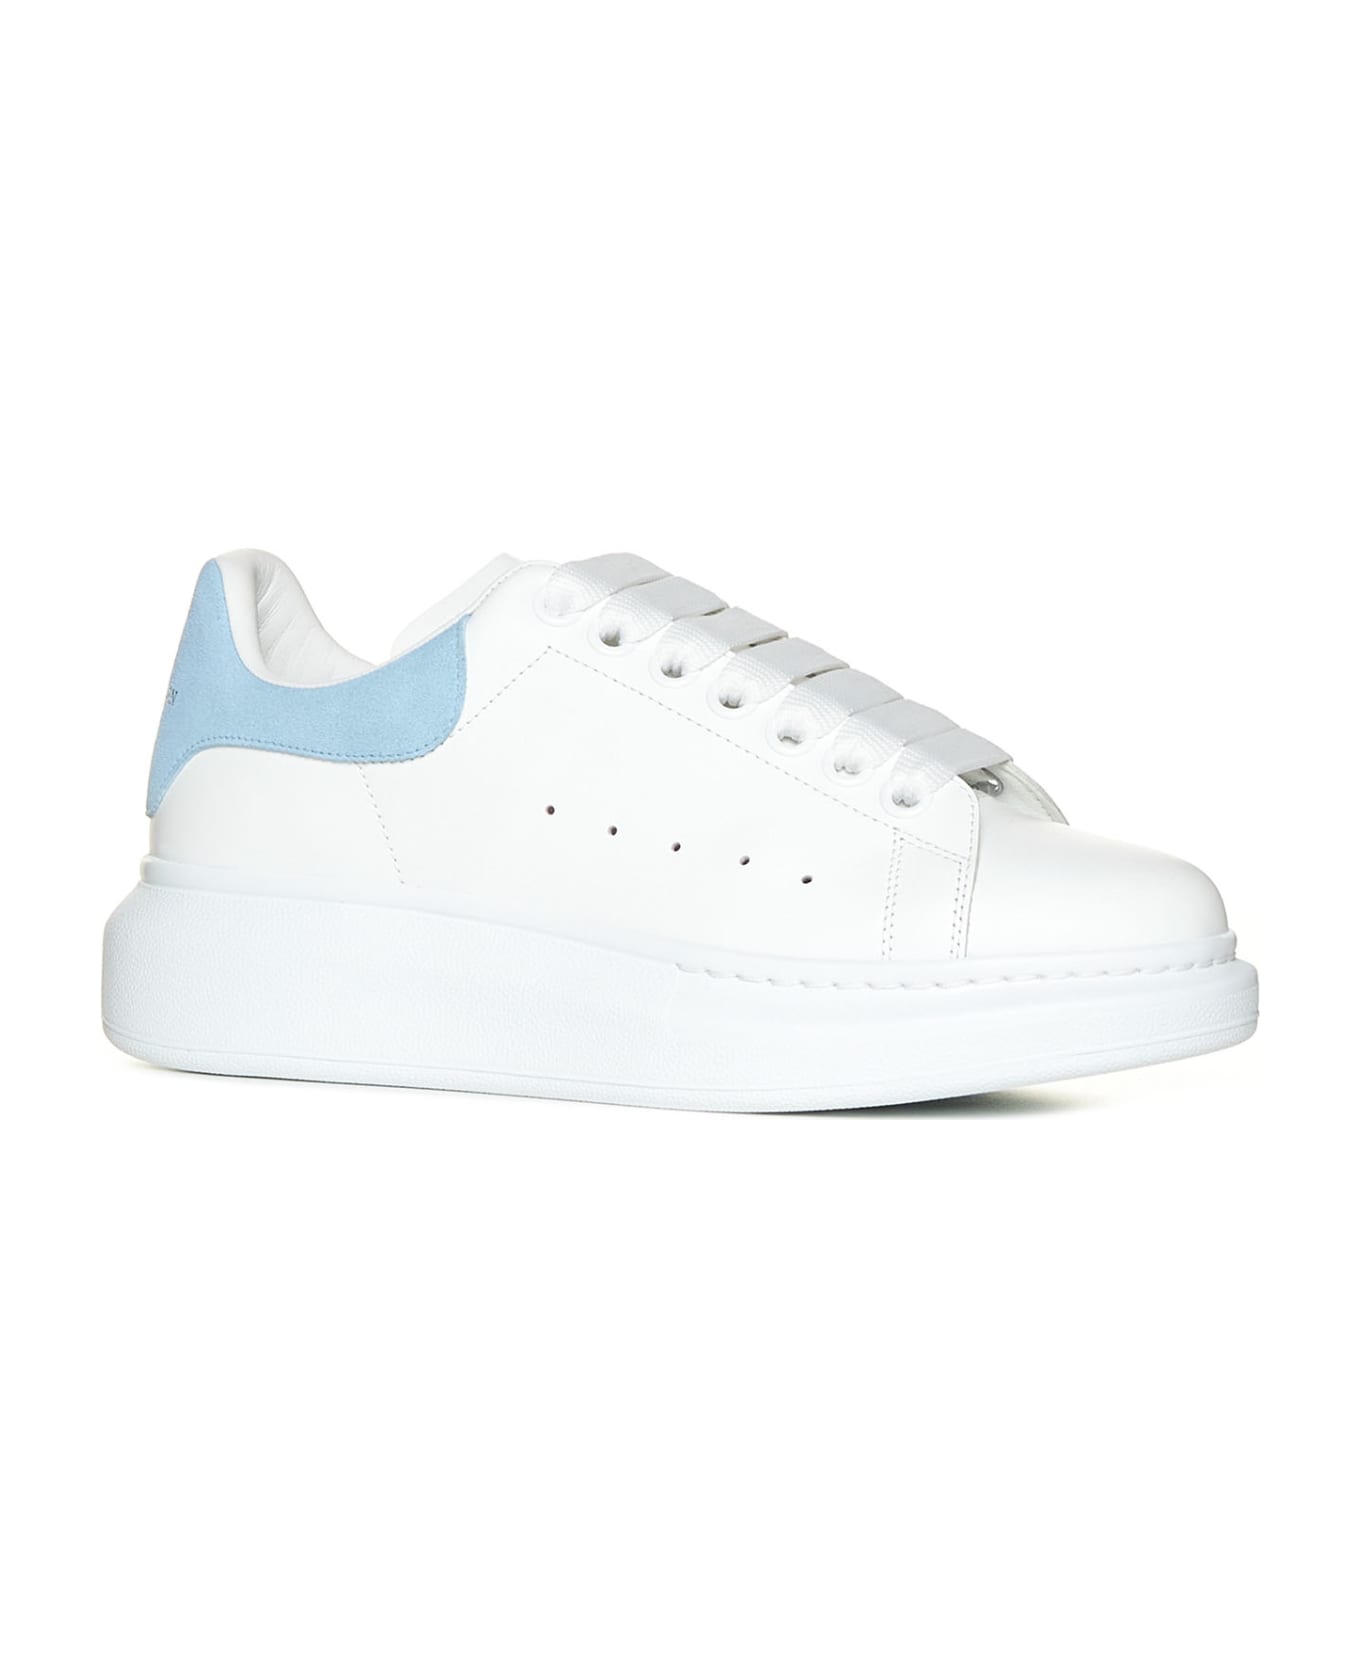 Alexander McQueen Sneakers In Leather And Light Blue Heel - White/powder Blue